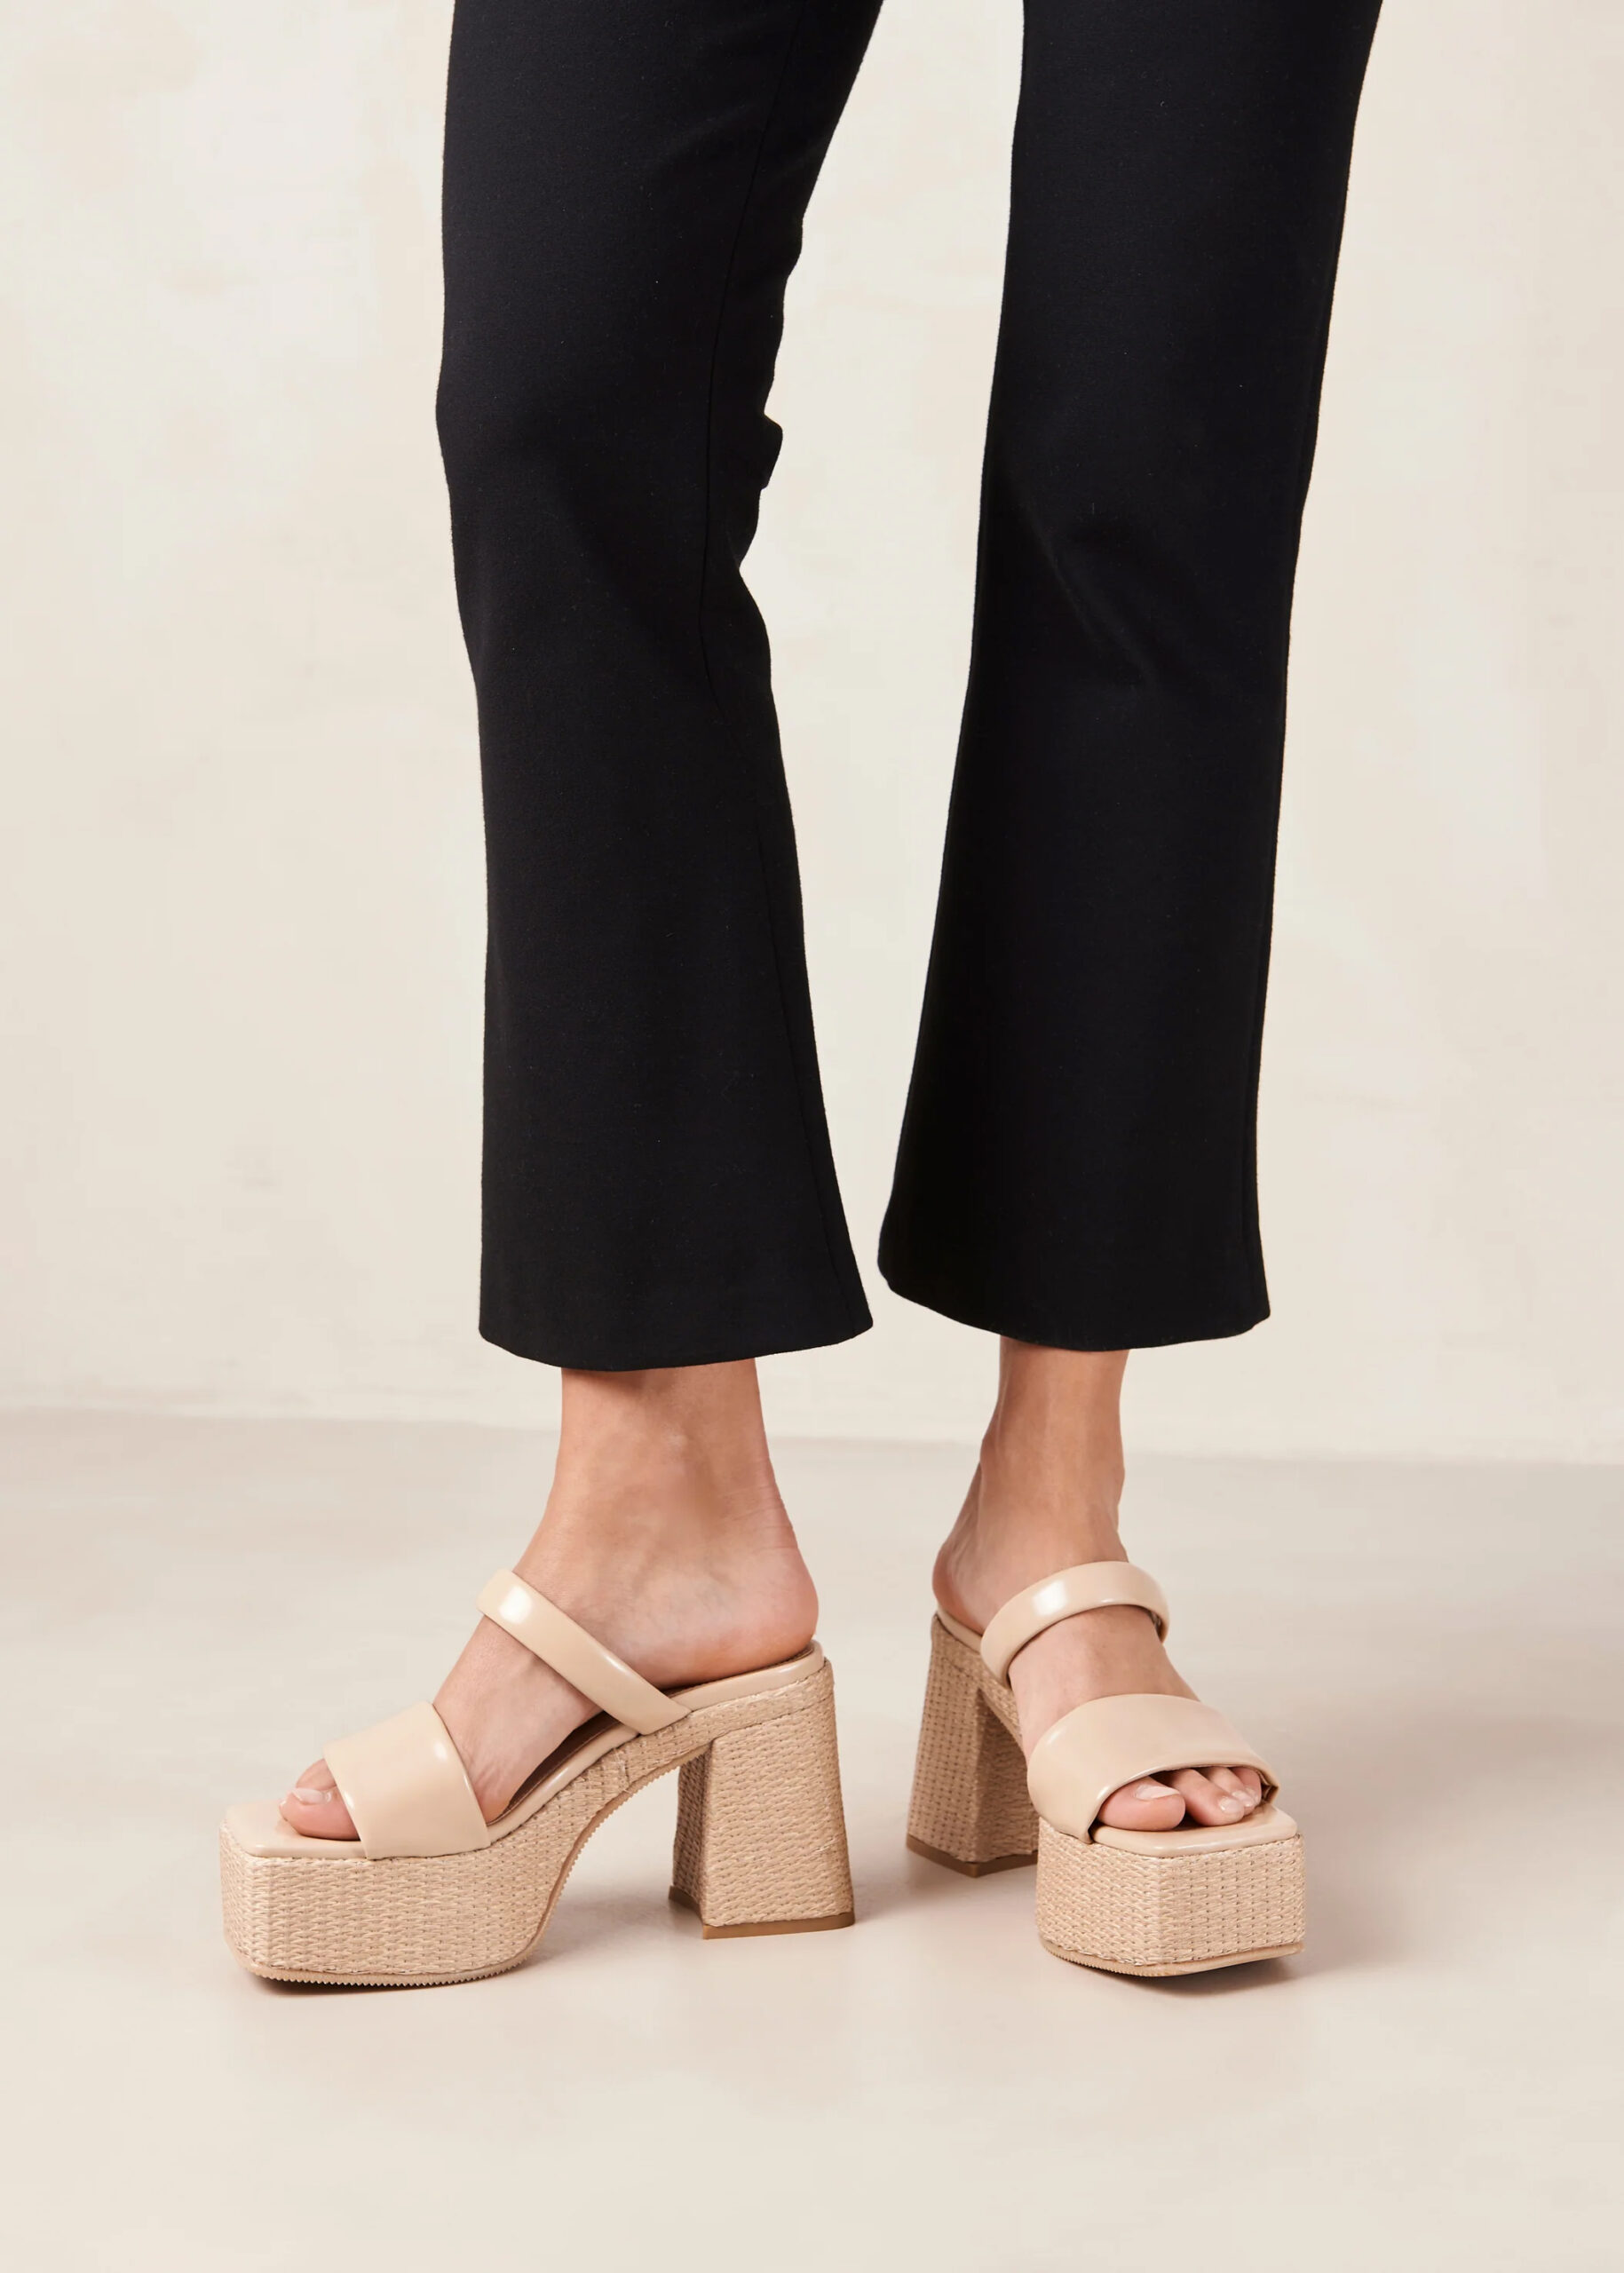 A model's legs and feet in black cropped pants and platform rattan beige-colored sandals. 